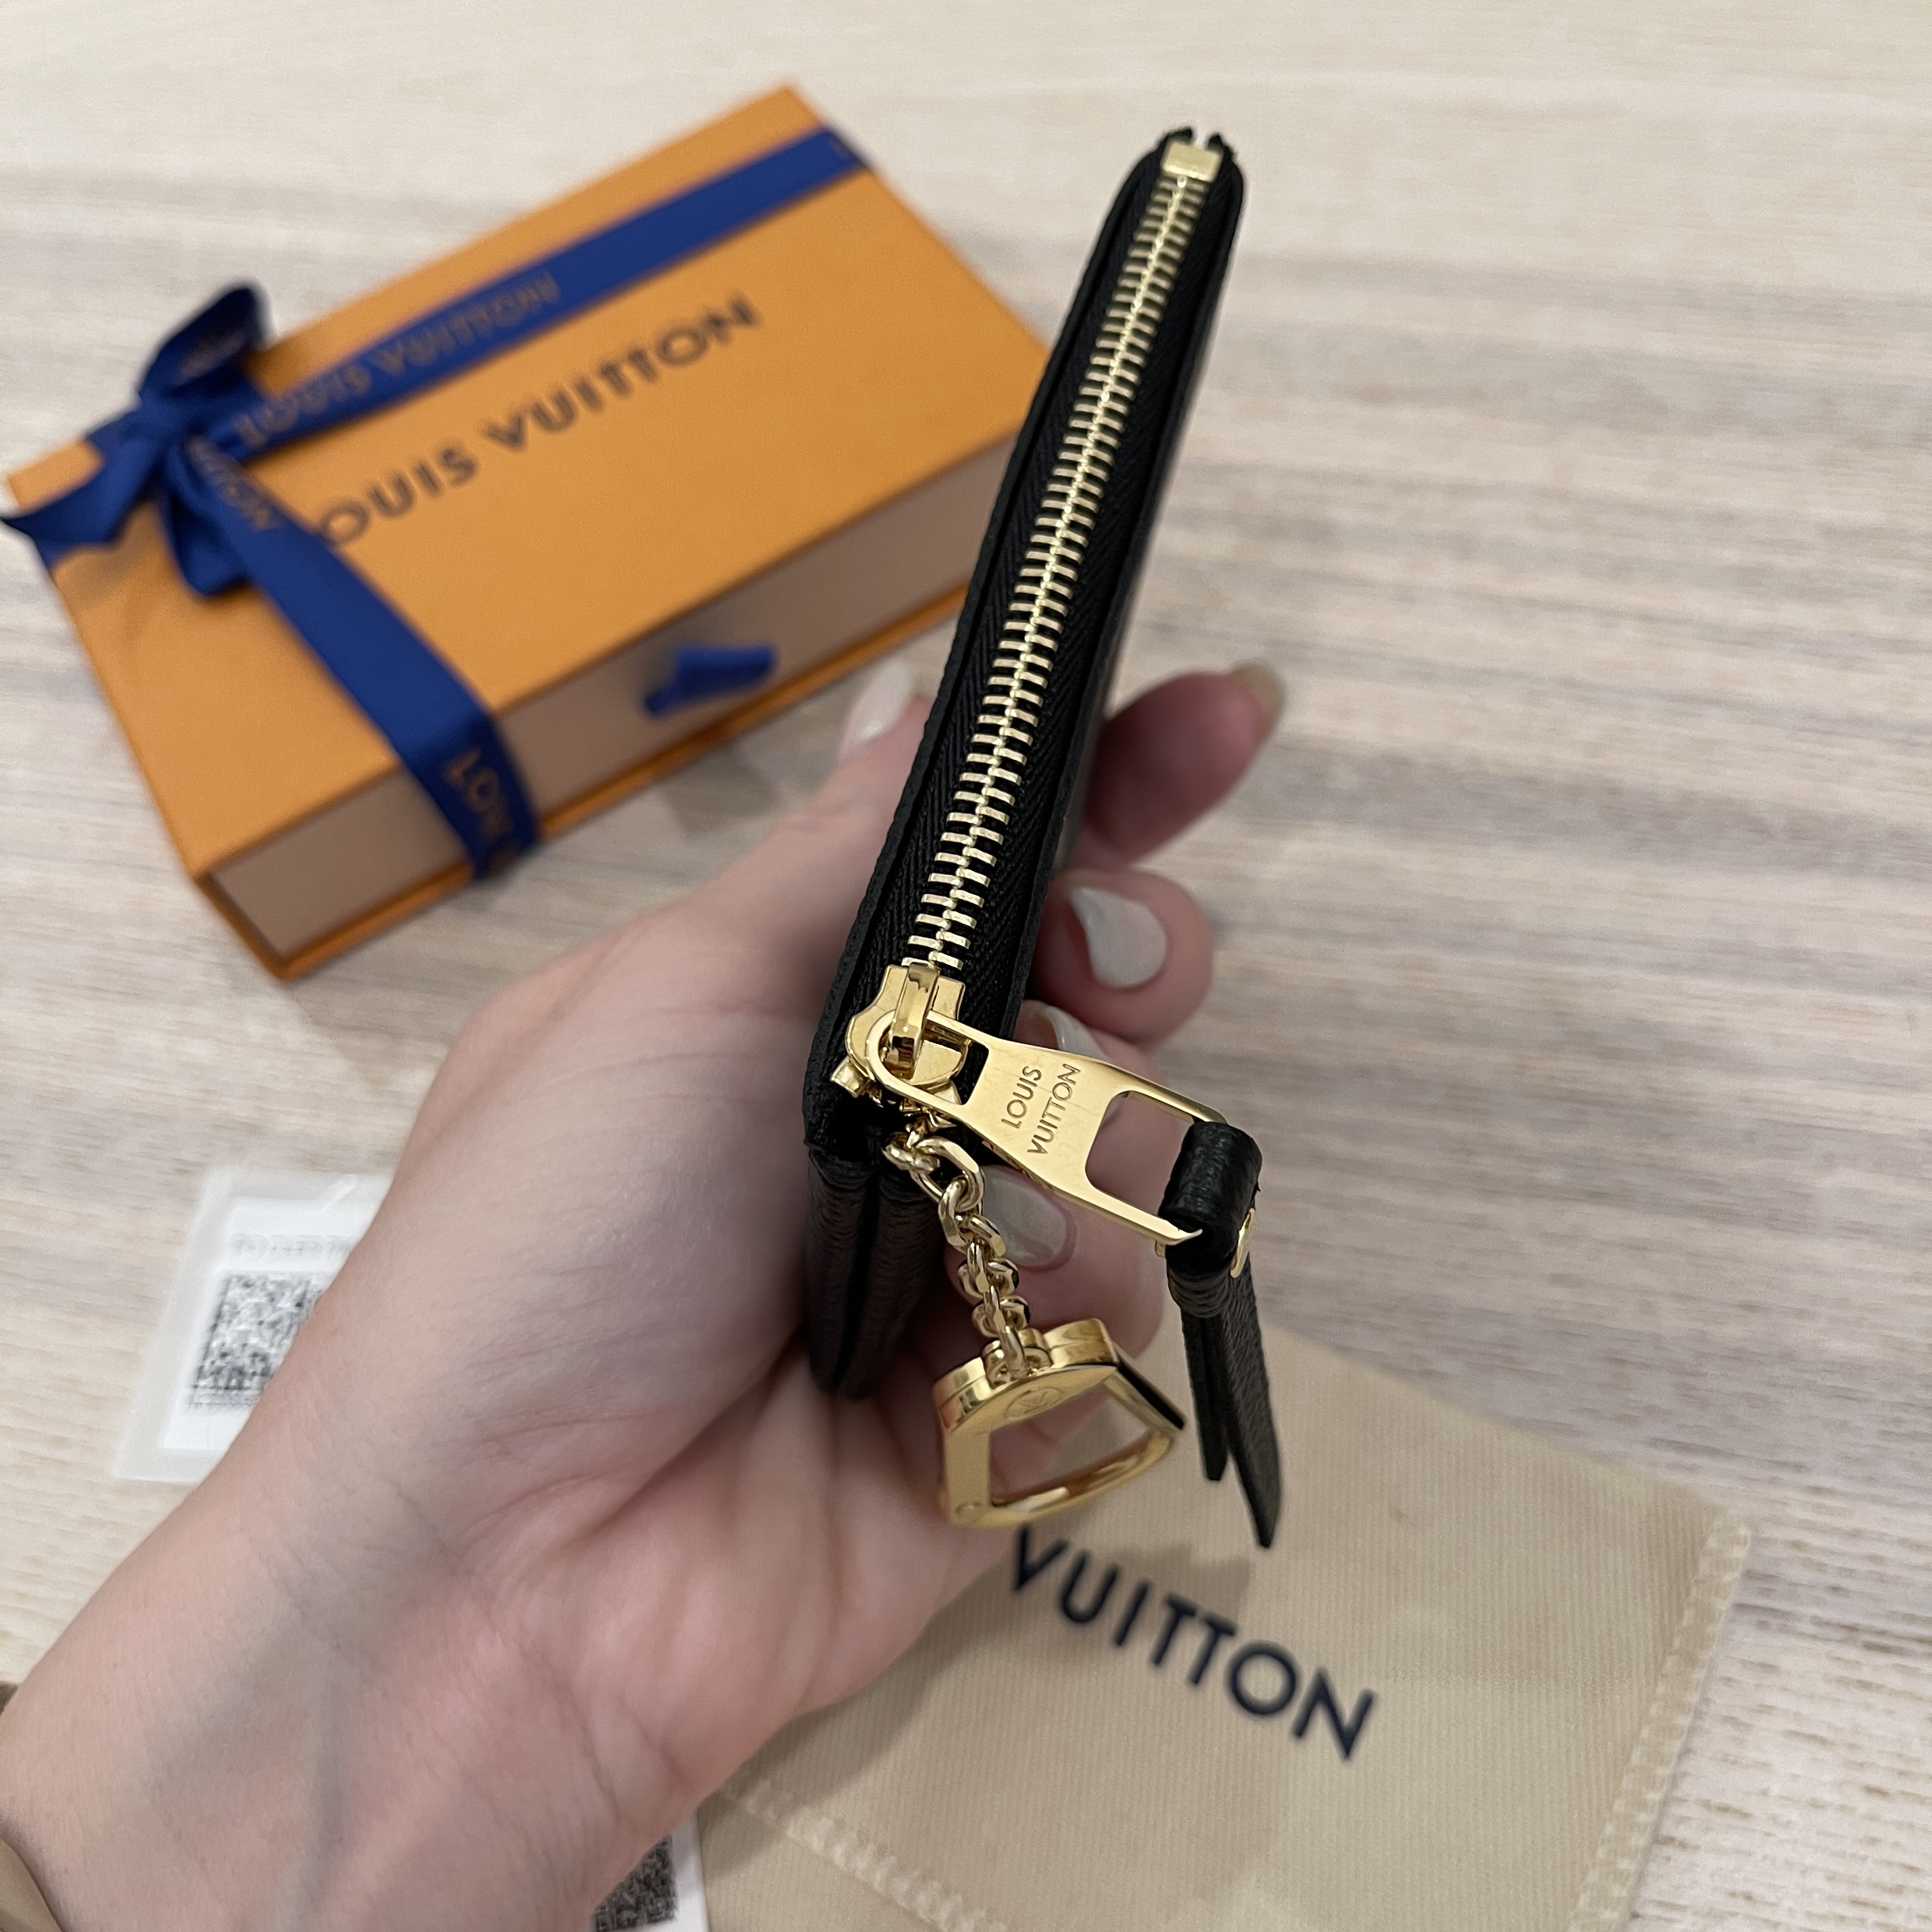 LOUIS VUITTON KEY POUCH REVIEW, WHAT FITS